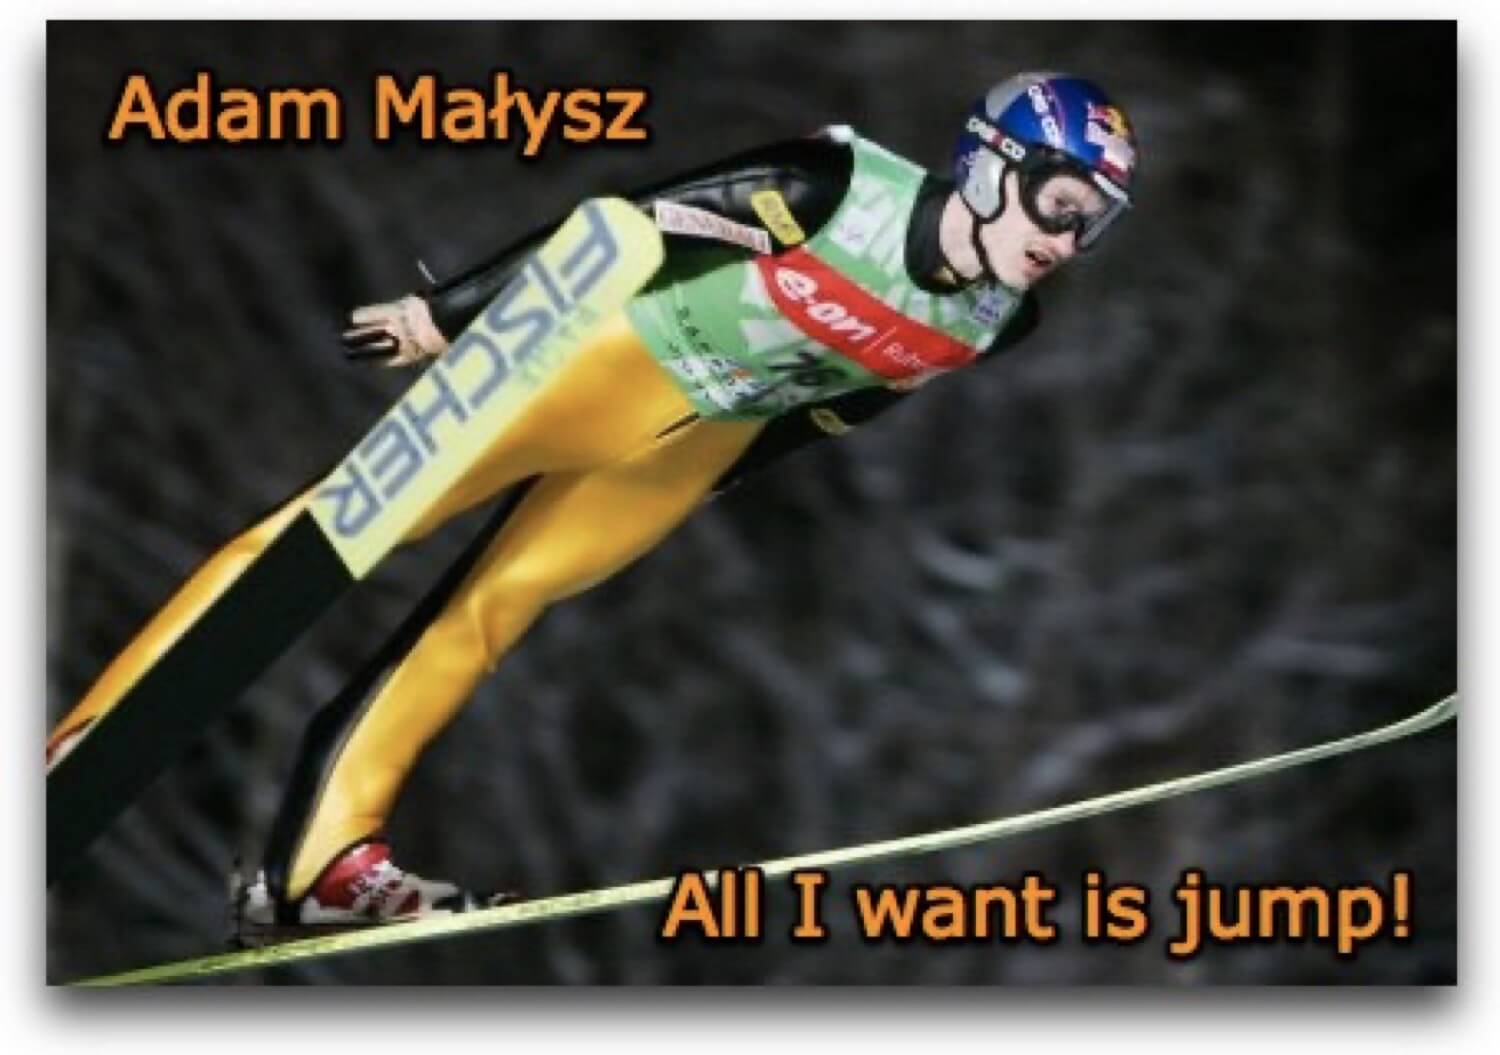 Adam Malysz - my perfect, humble and inspiring role model